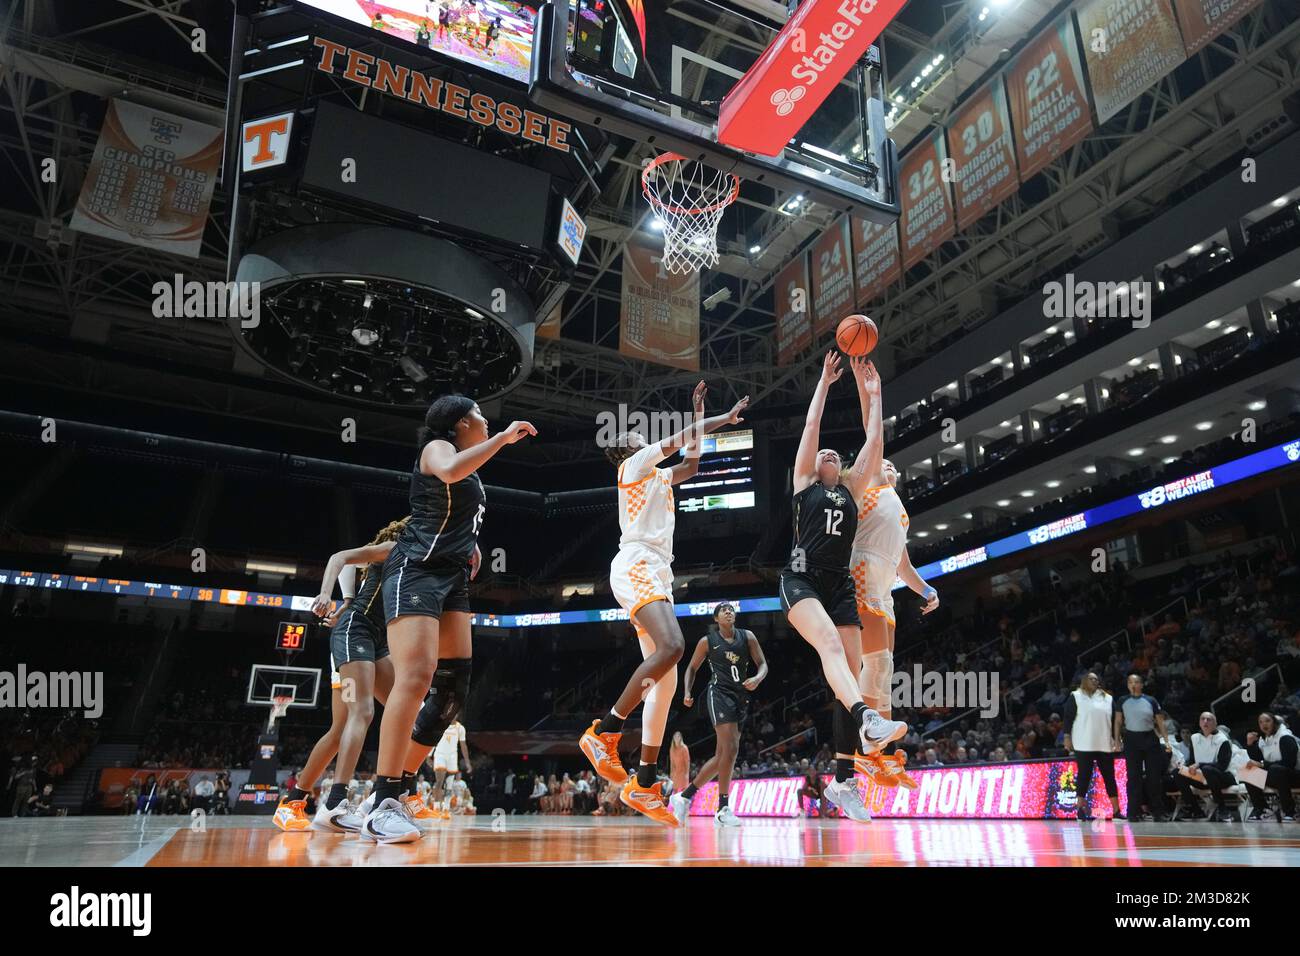 December 14, 2022: Rachel Ranke #12 of the UCF Knights grabs the rebound during the NCAA basketball game between the University of Tennessee Lady Volunteers and the University of Central Florida Knights at Thompson Boling Arena in Knoxville TN Tim Gangloff/CSM Stock Photo